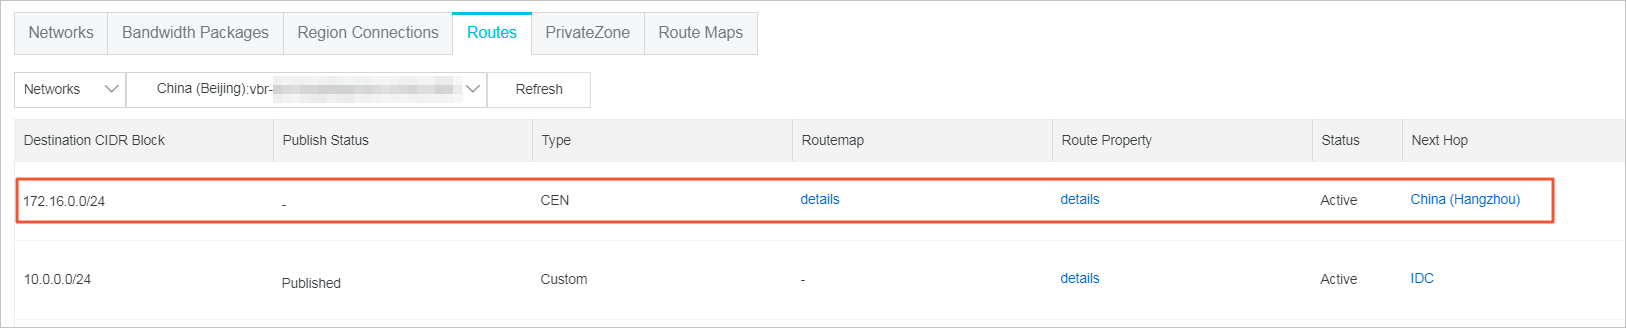 Add a route map that allows Data center 1 to access Date center 2